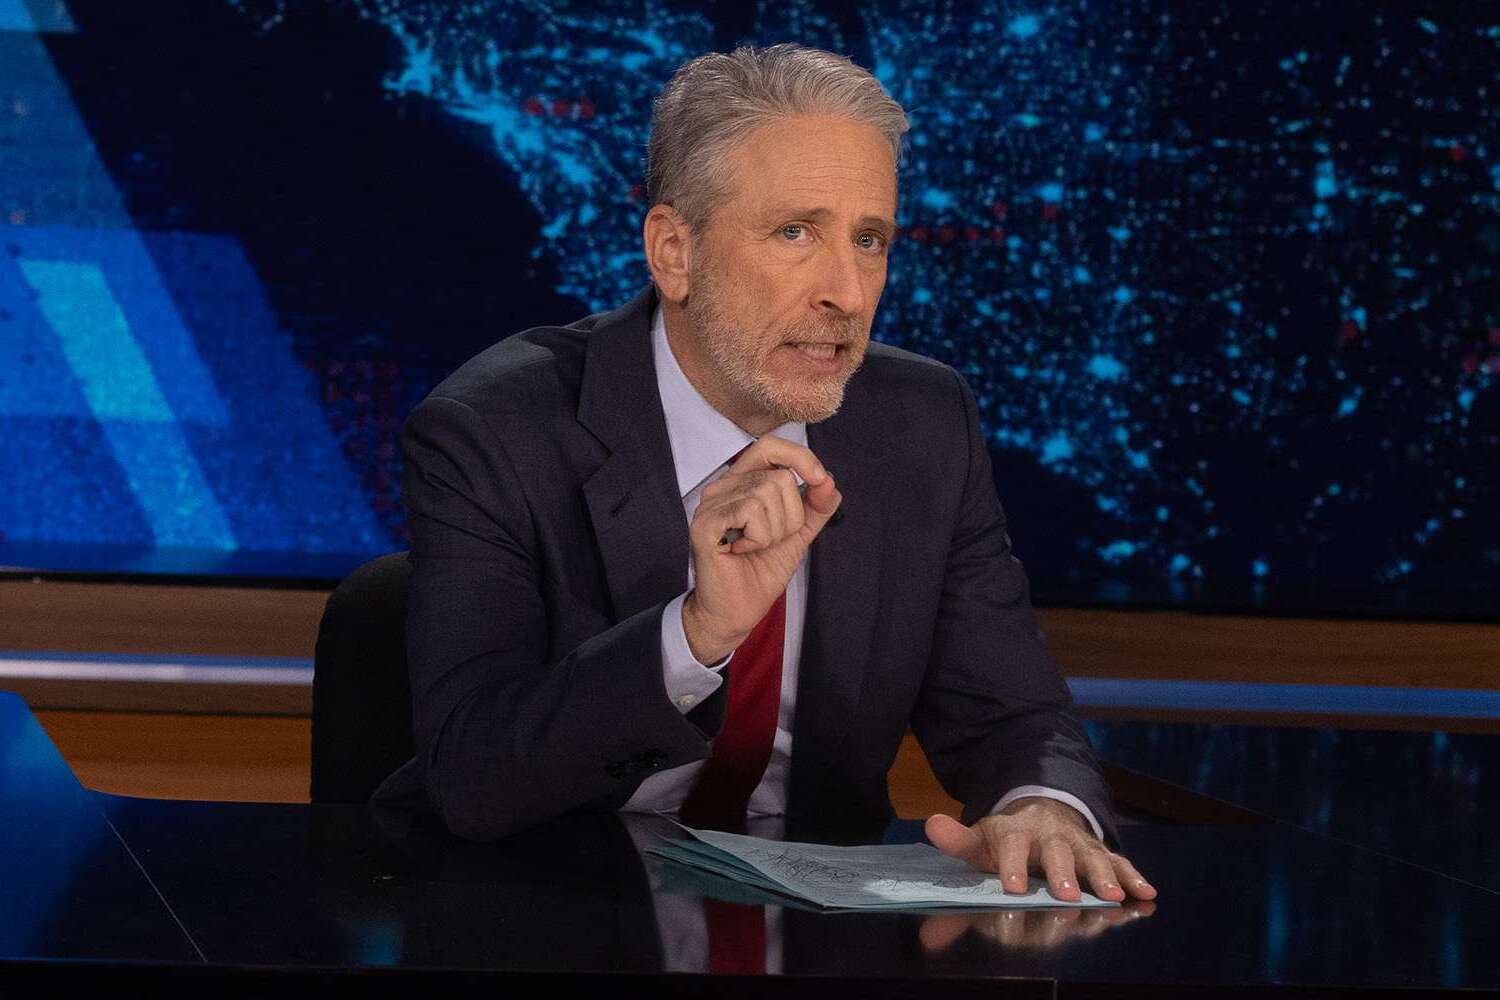 Jon Stewart Responds To ‘The Daily Show’ Monologue Backlash